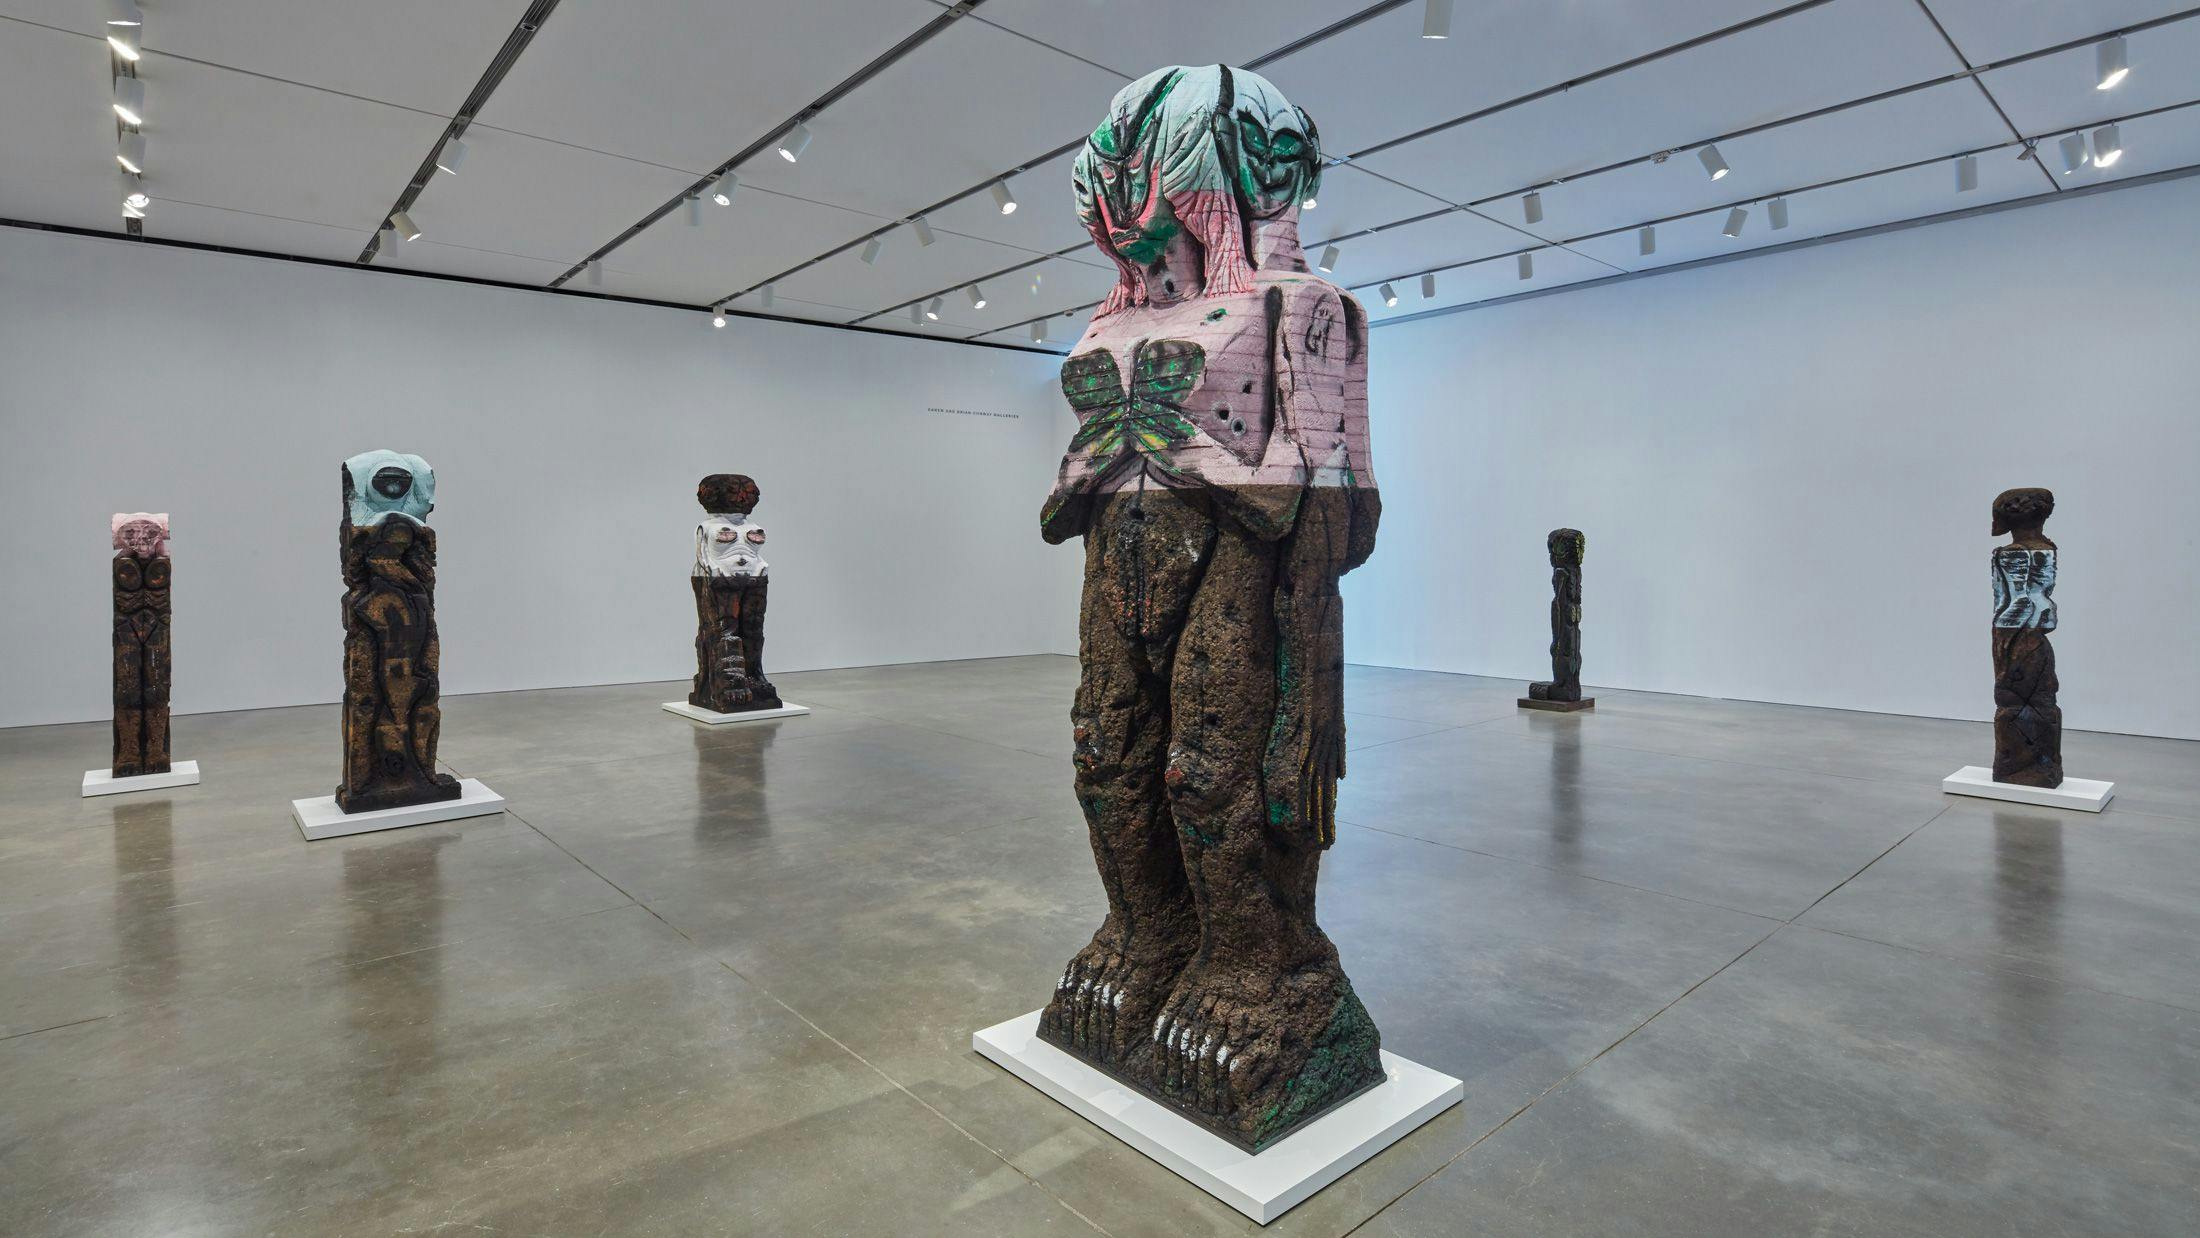 Installation view of the exhibition, Huma Bhabha: They Live, at the Institute of Contemporary Art Boston in Boston, dated 2019.